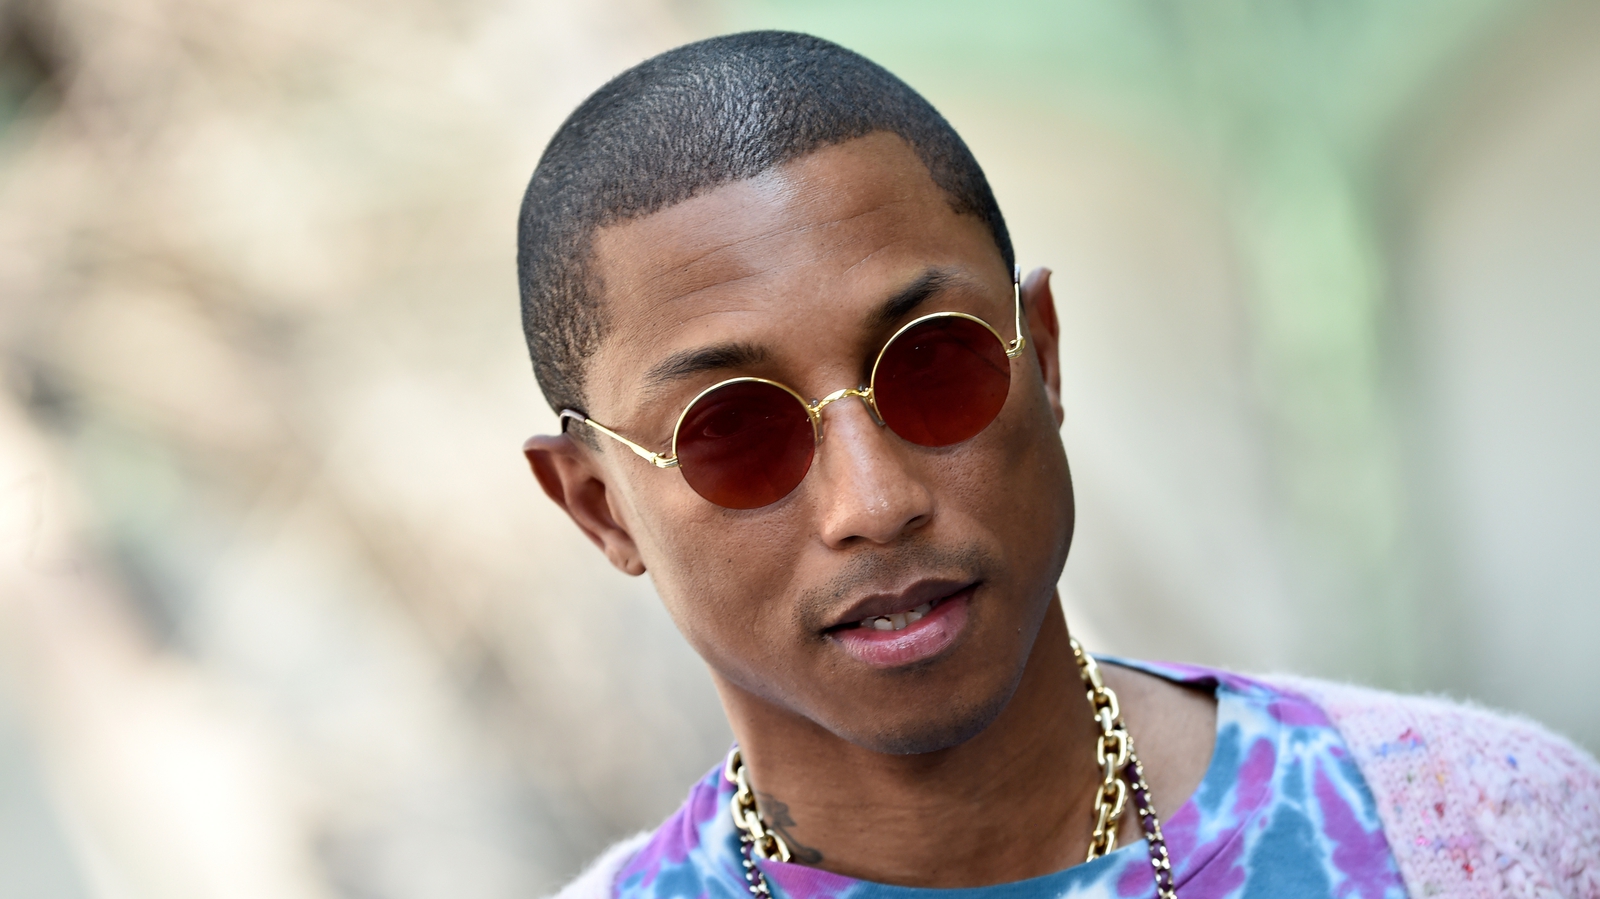 Pharrell and Jay-Z Team Up on New Song 'Entrepreneur' - Our Culture